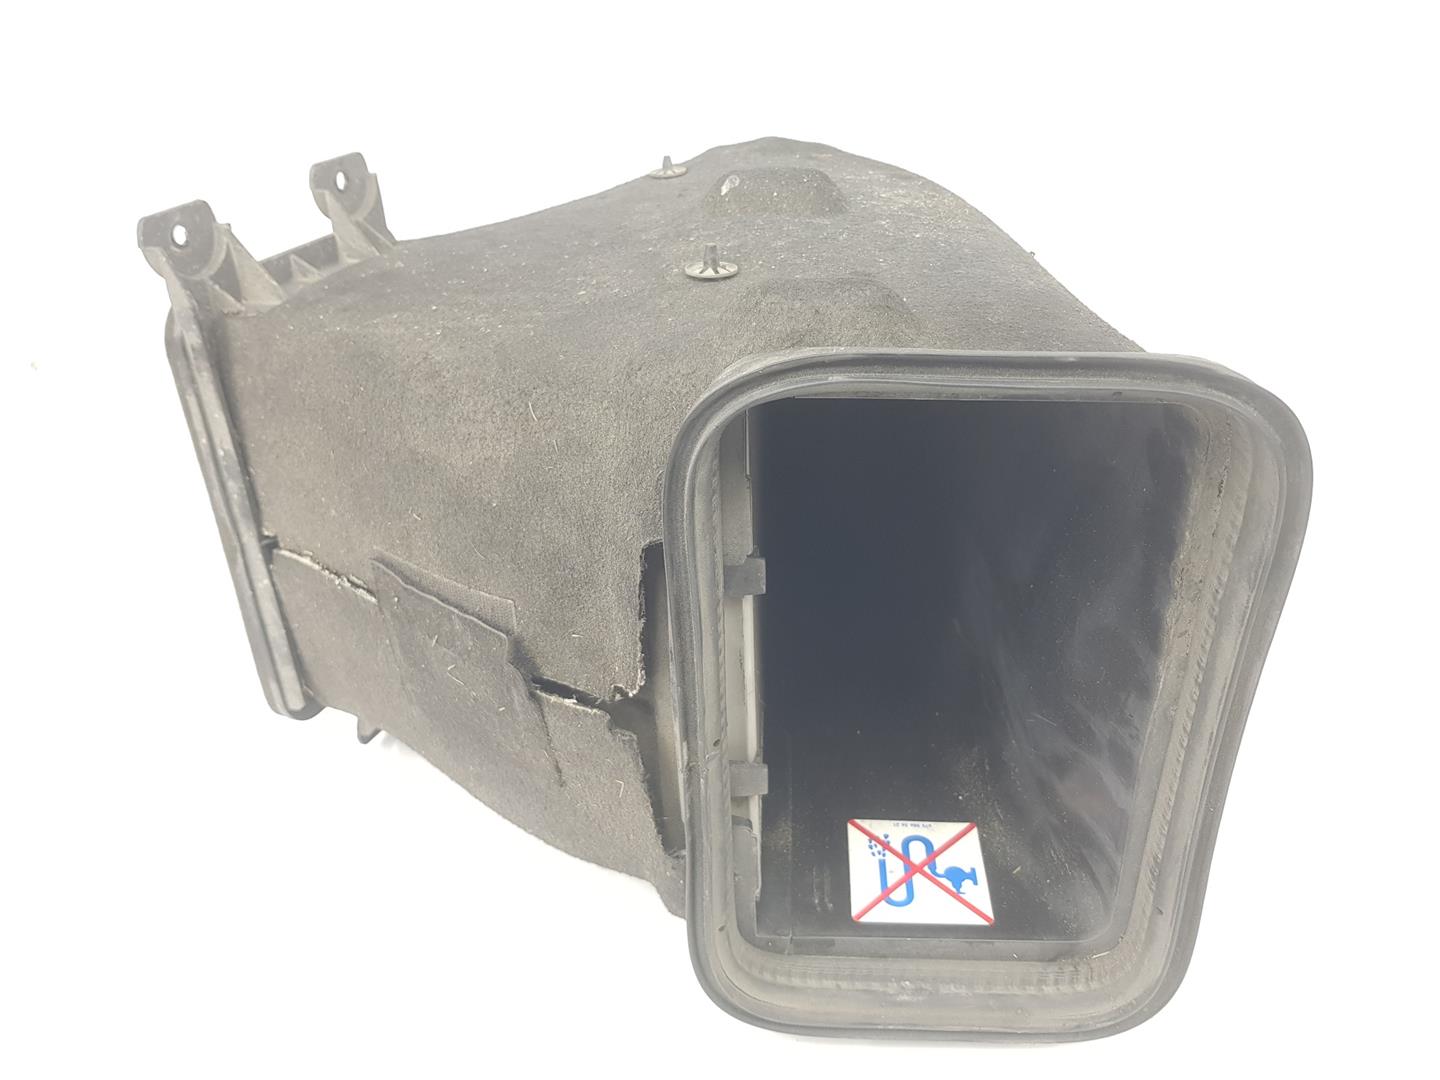 VOLKSWAGEN Crafter 1 generation (2006-2016) Other Engine Compartment Parts 6735843421, 2E0819021F 24252678